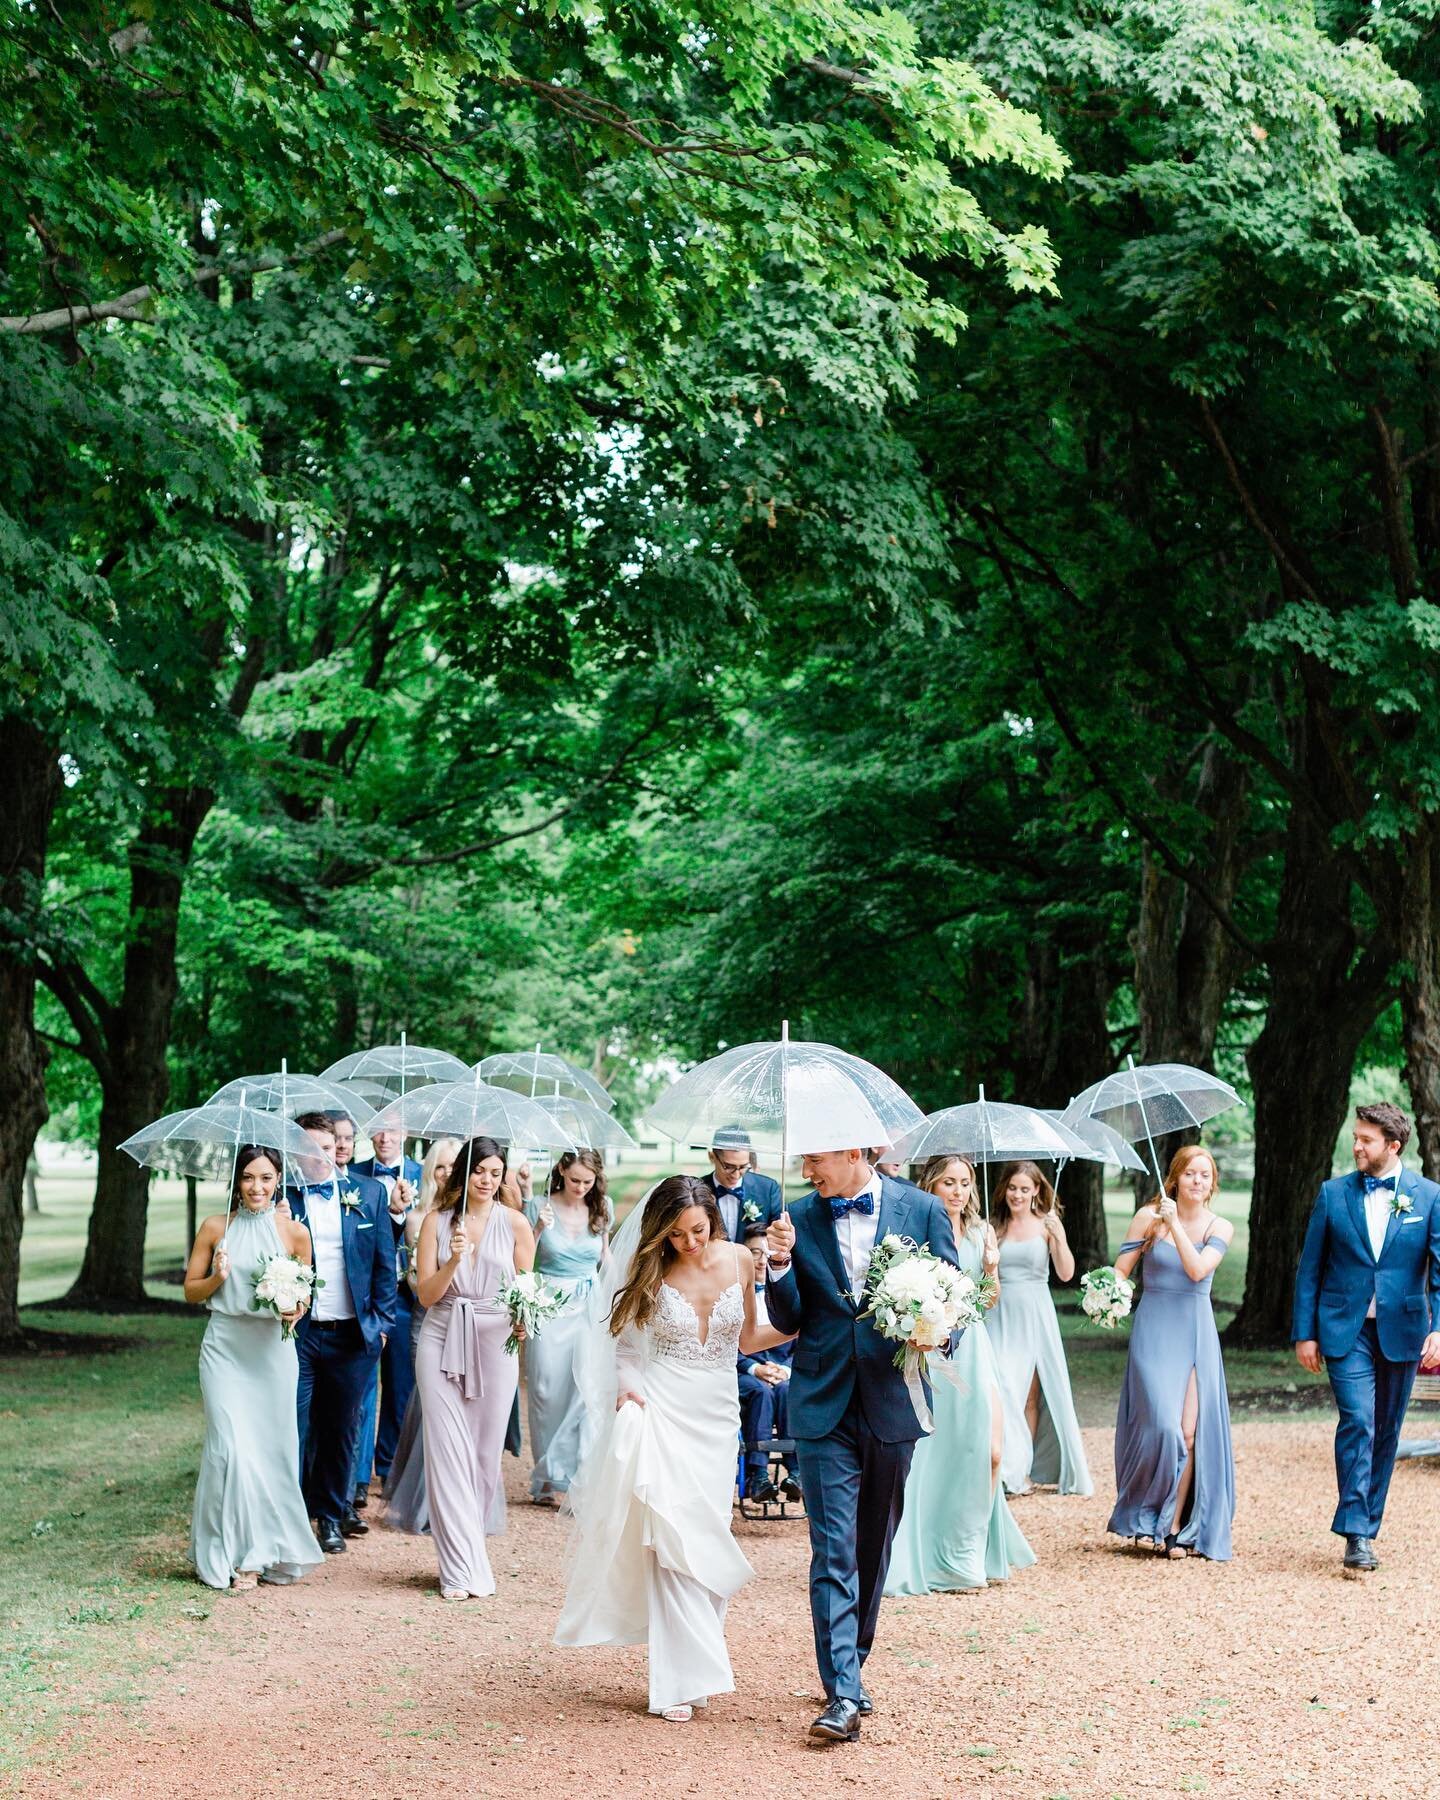 Rain rain go away. But not quite yet!
We all know that rain on your wedding day has long been symbolic for good luck, renewal &amp; fertility but&hellip; don&rsquo;t forget about all of the immediate benefits ☔️. 
Some of our favourite pics include a